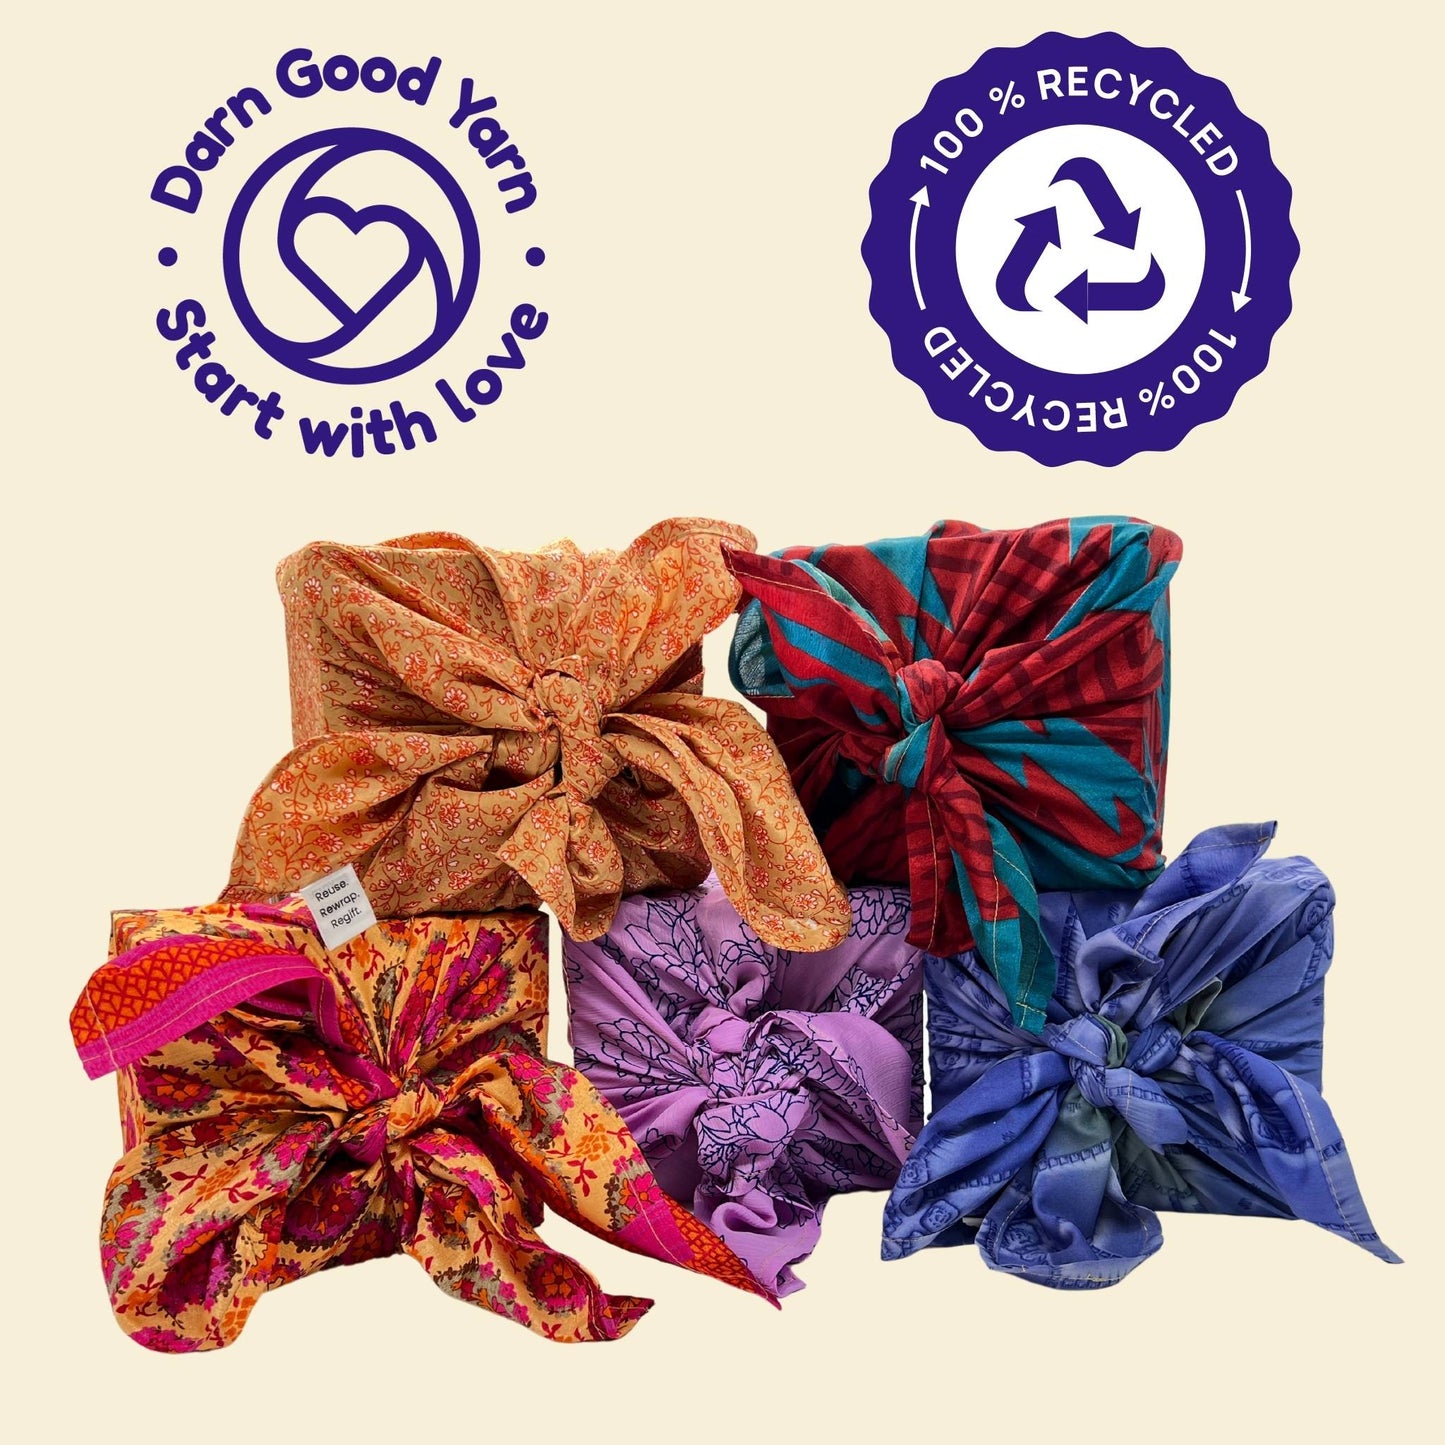 Five boxes wrapped in Furoshiki gift wrap in multiple colors on a cream colored backdrop. On the top of the page there is a darn good yarn logo and a recycle logo in purple. 